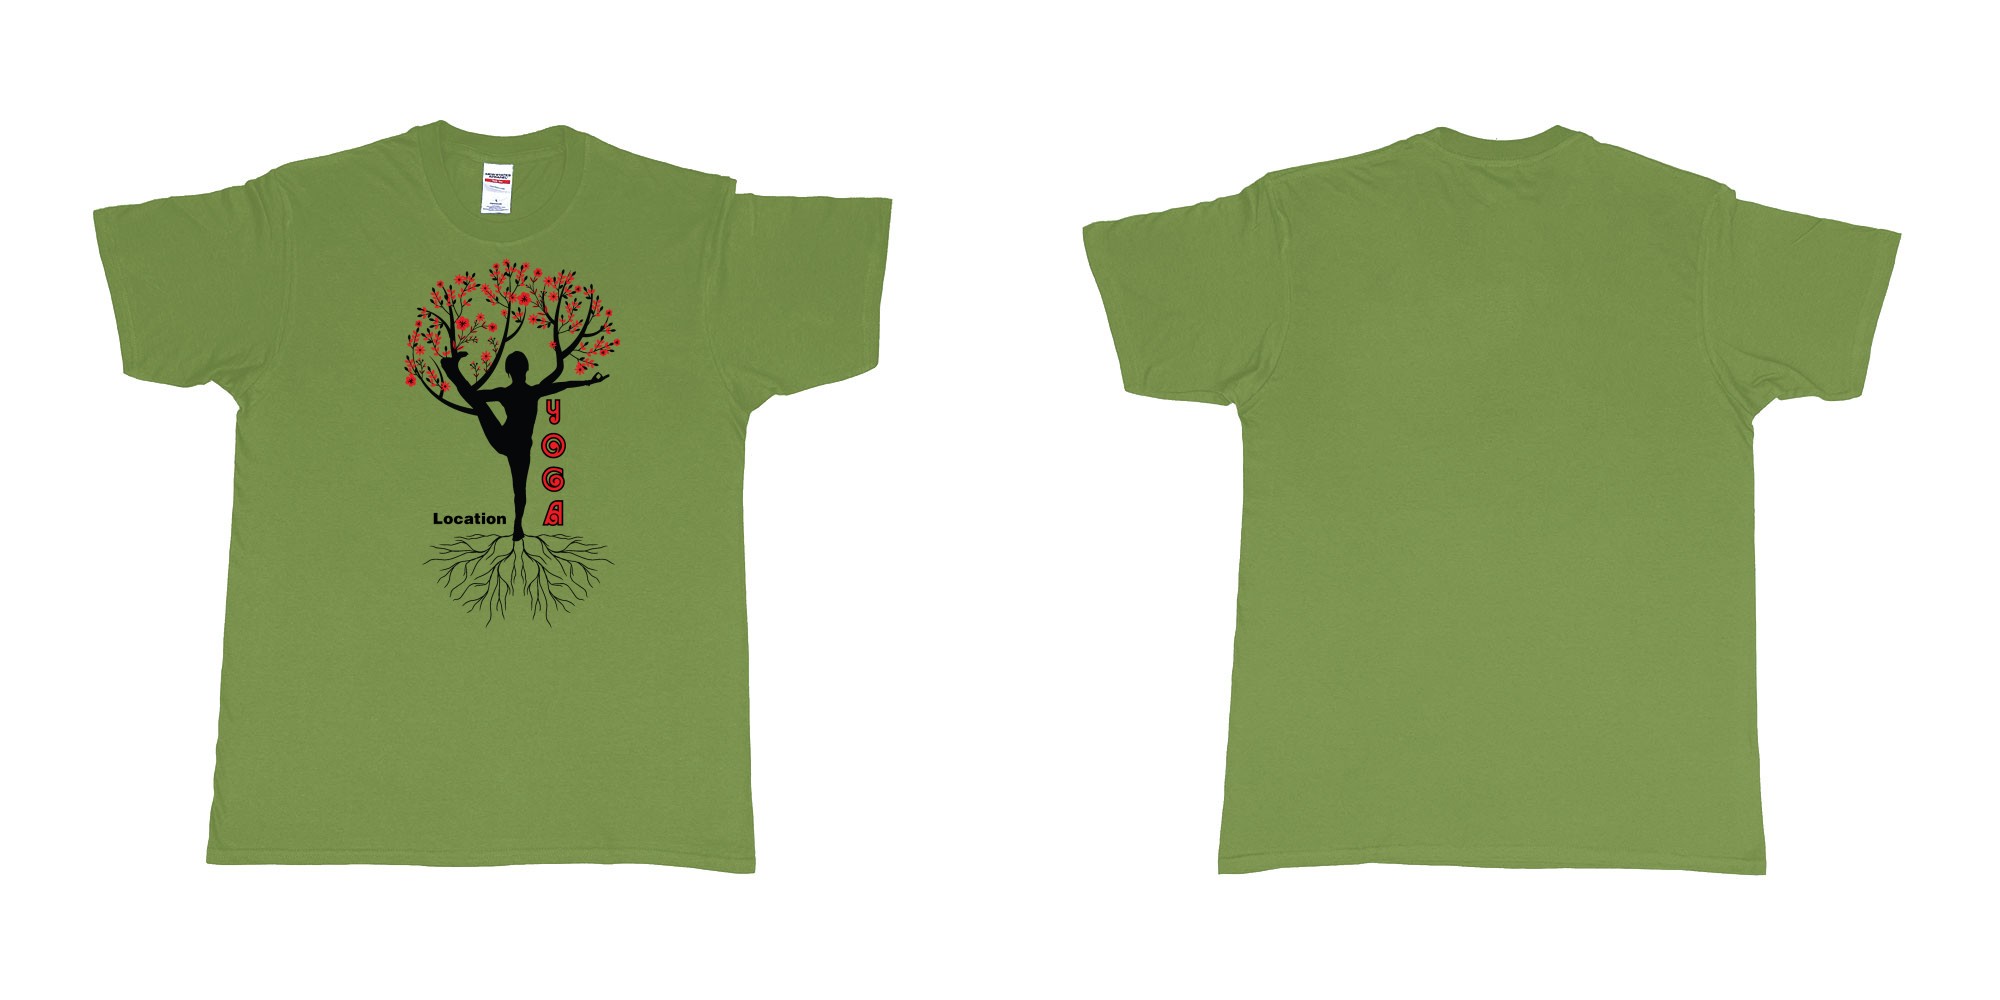 Custom tshirt design yoga tree of life is blooming own logo location design in fabric color military-green choice your own text made in Bali by The Pirate Way